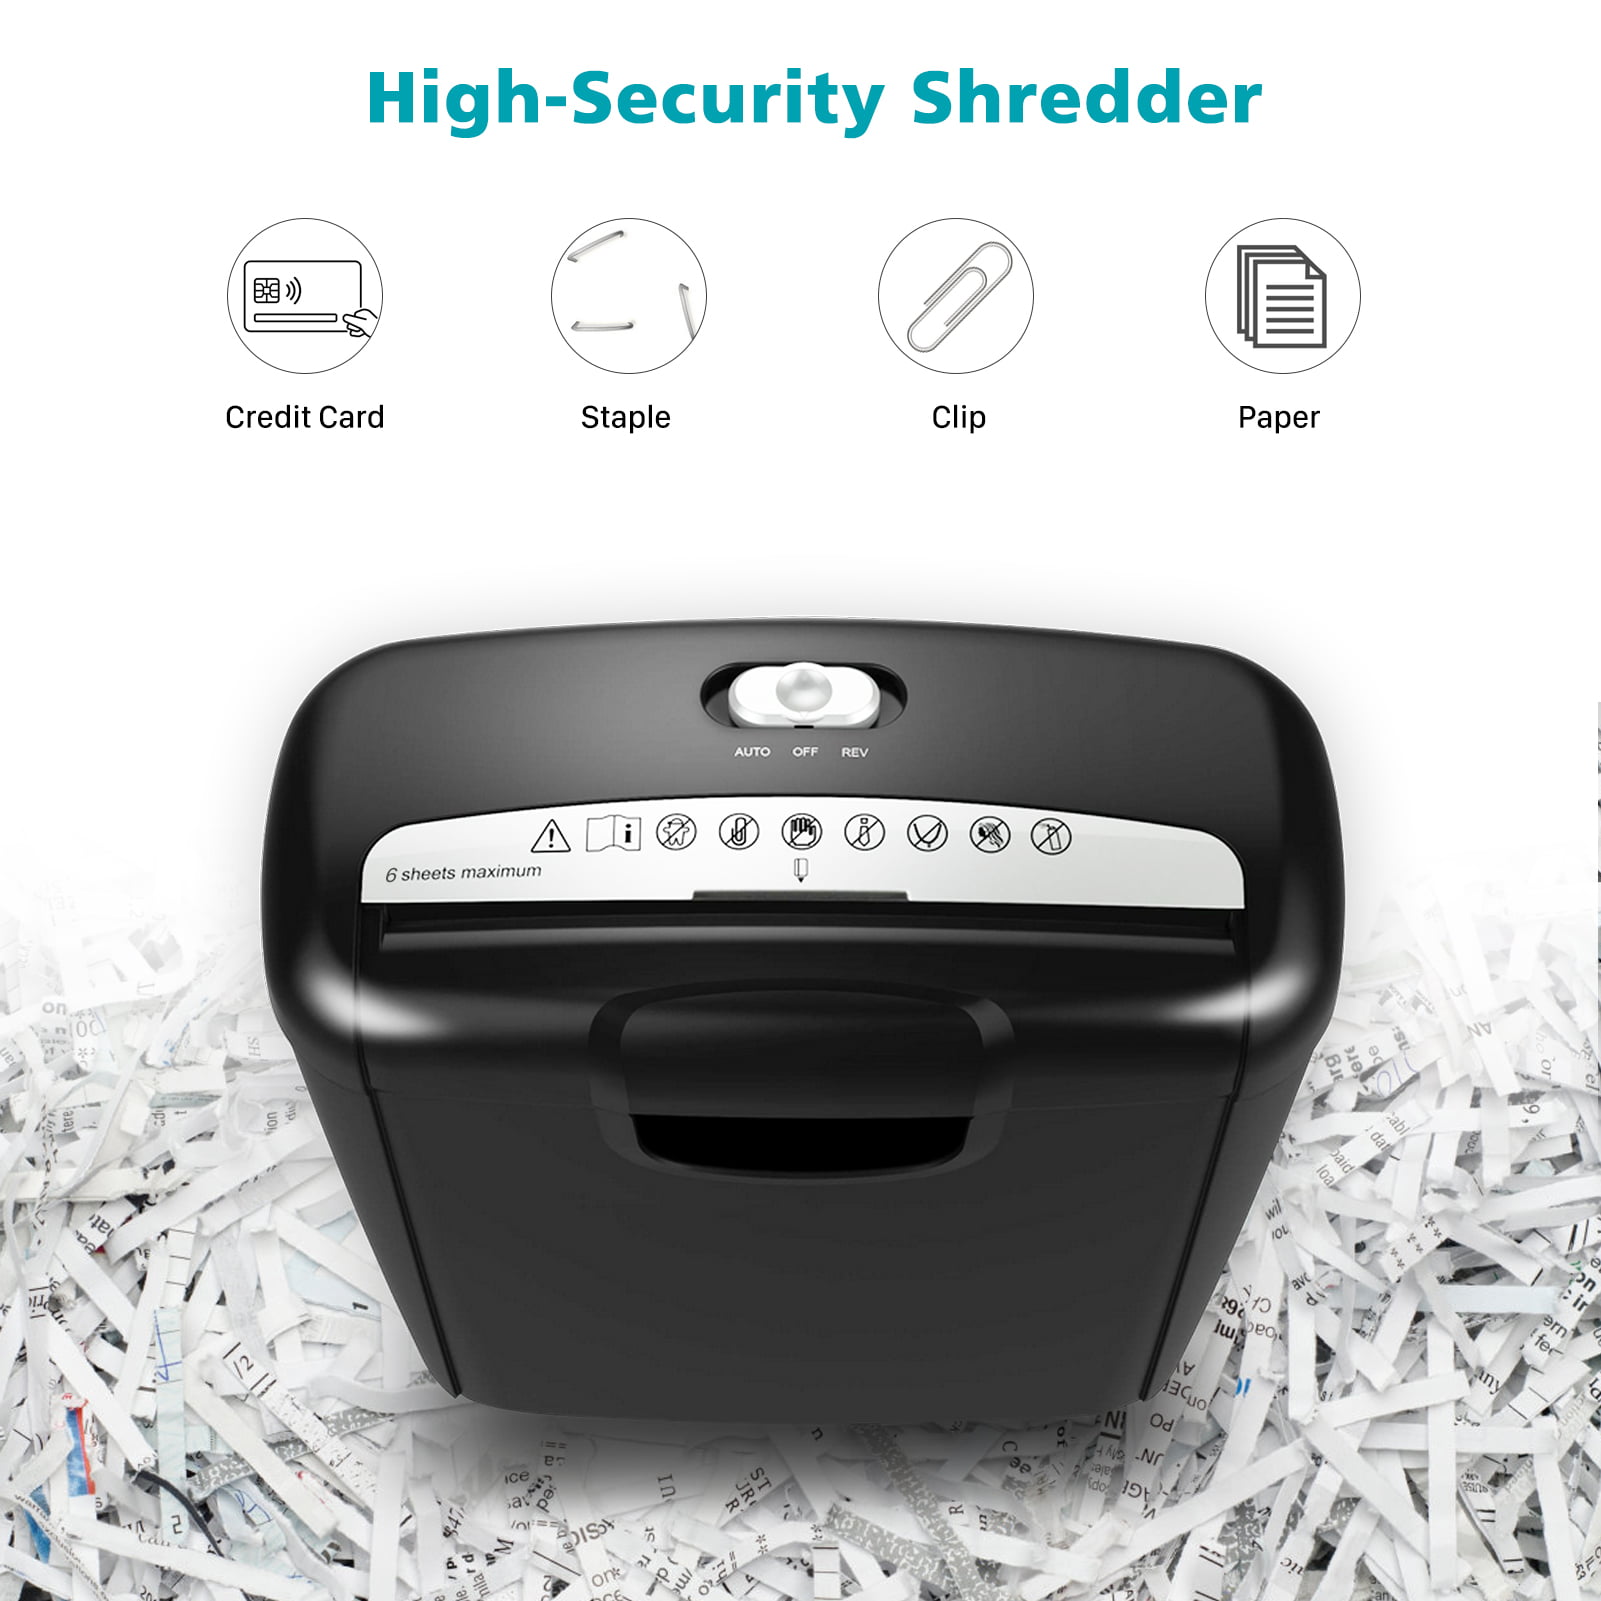 Ansoon Paper Shredder Lubricant Sheets 24pcs for sale online 